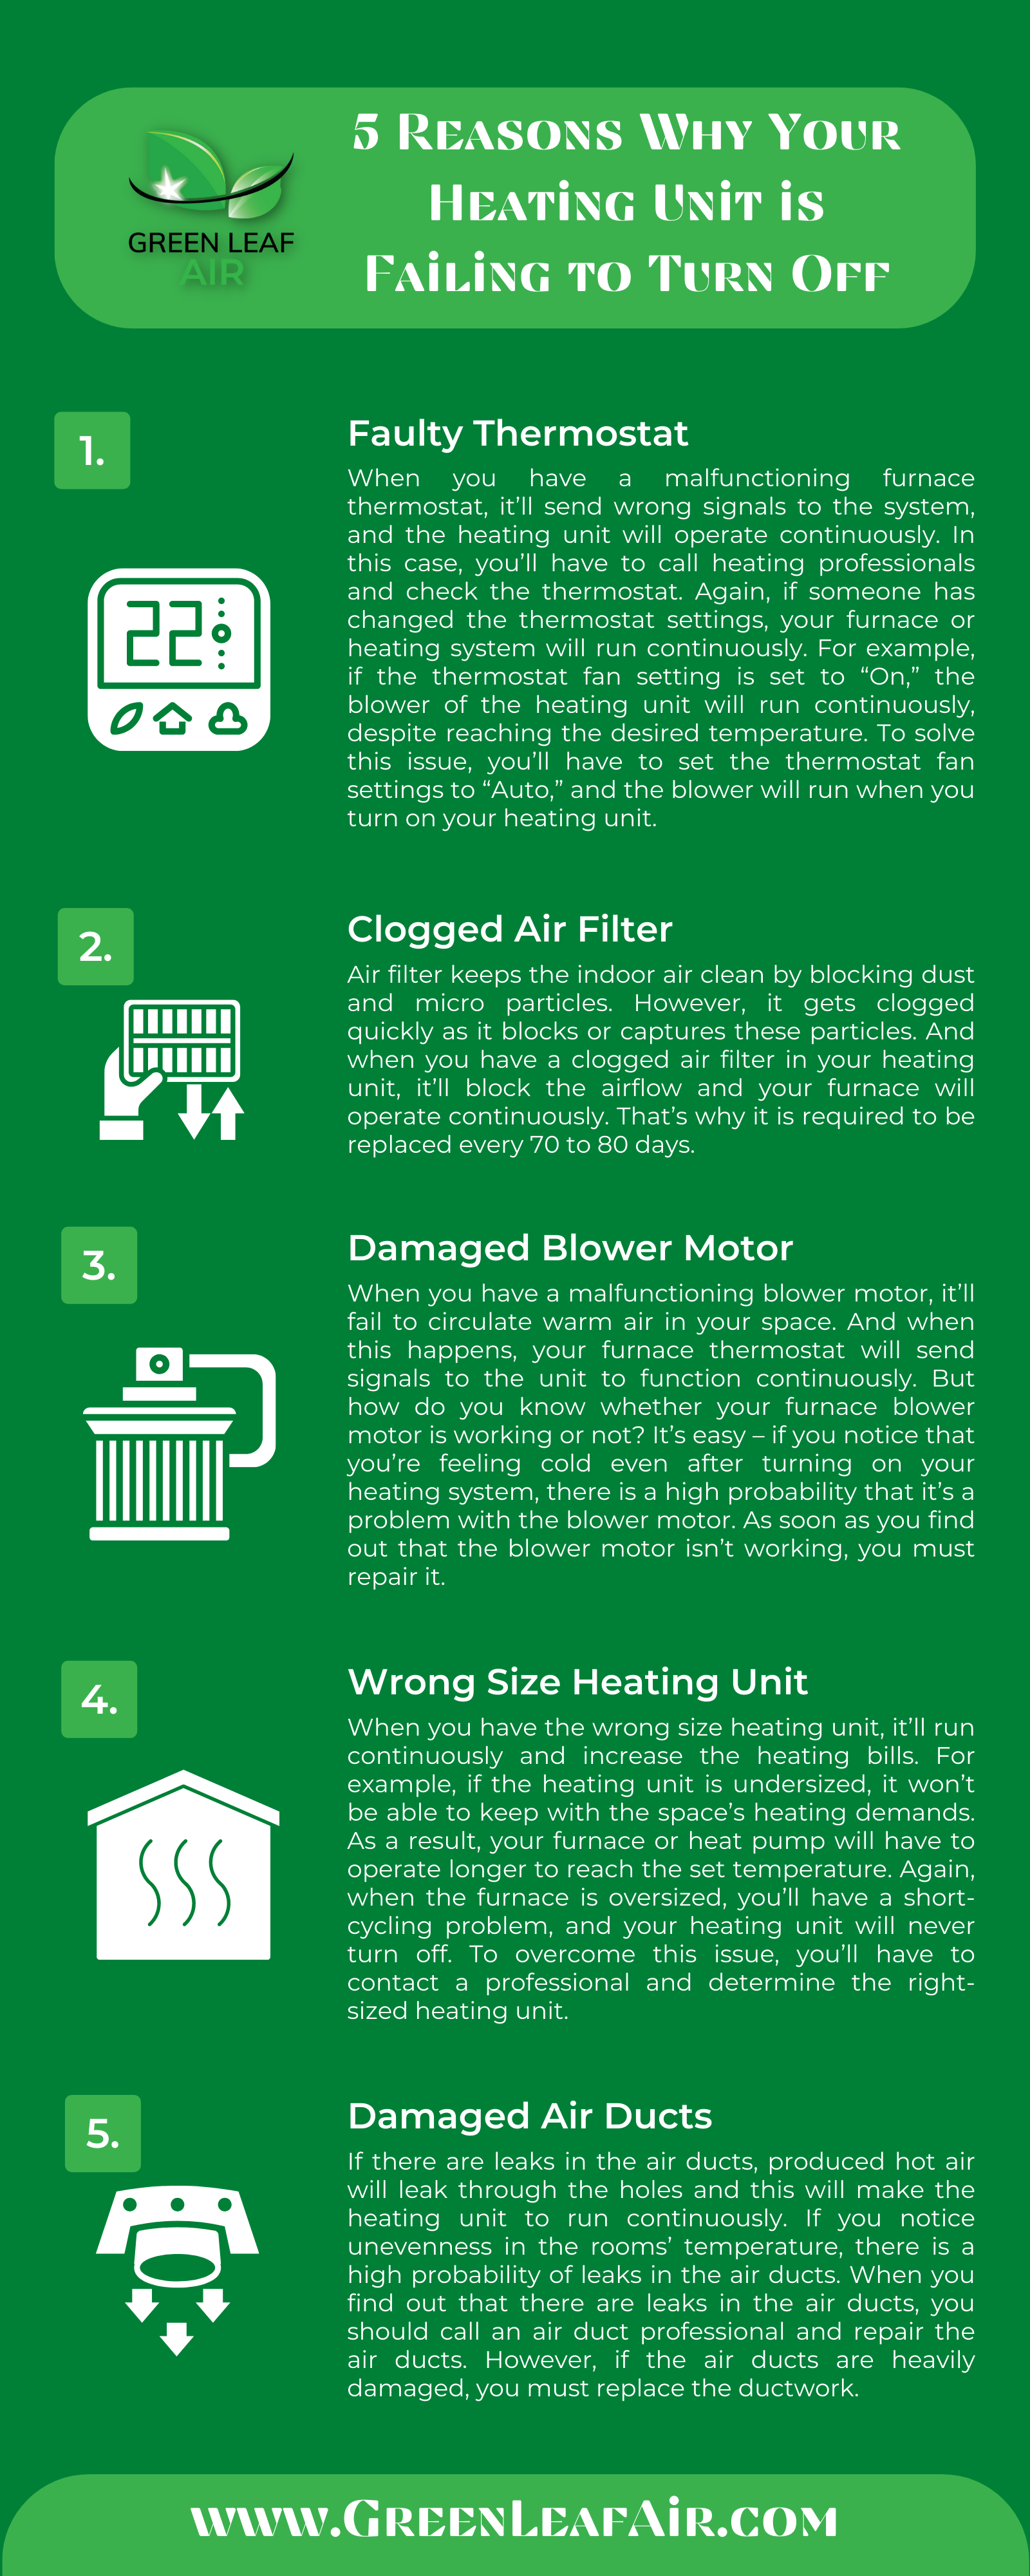 5 Reasons Why Your Heating Unit is Failing to Turn Off